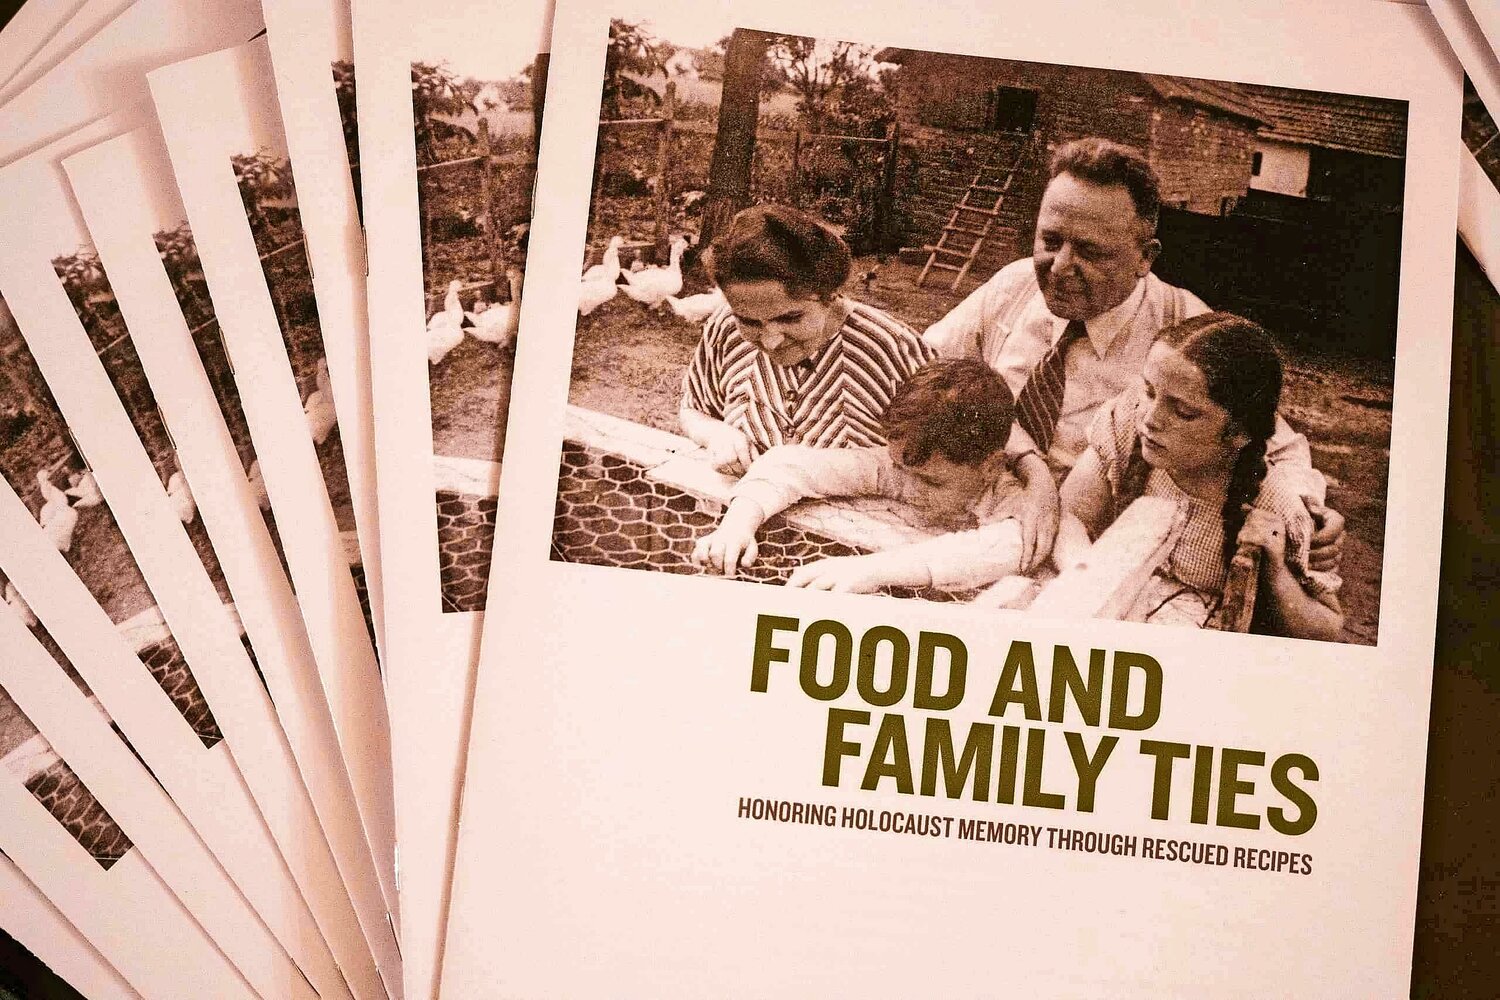 “Food and Family Ties, Honoring Holocaust Memory Through Rescued Recipes.”